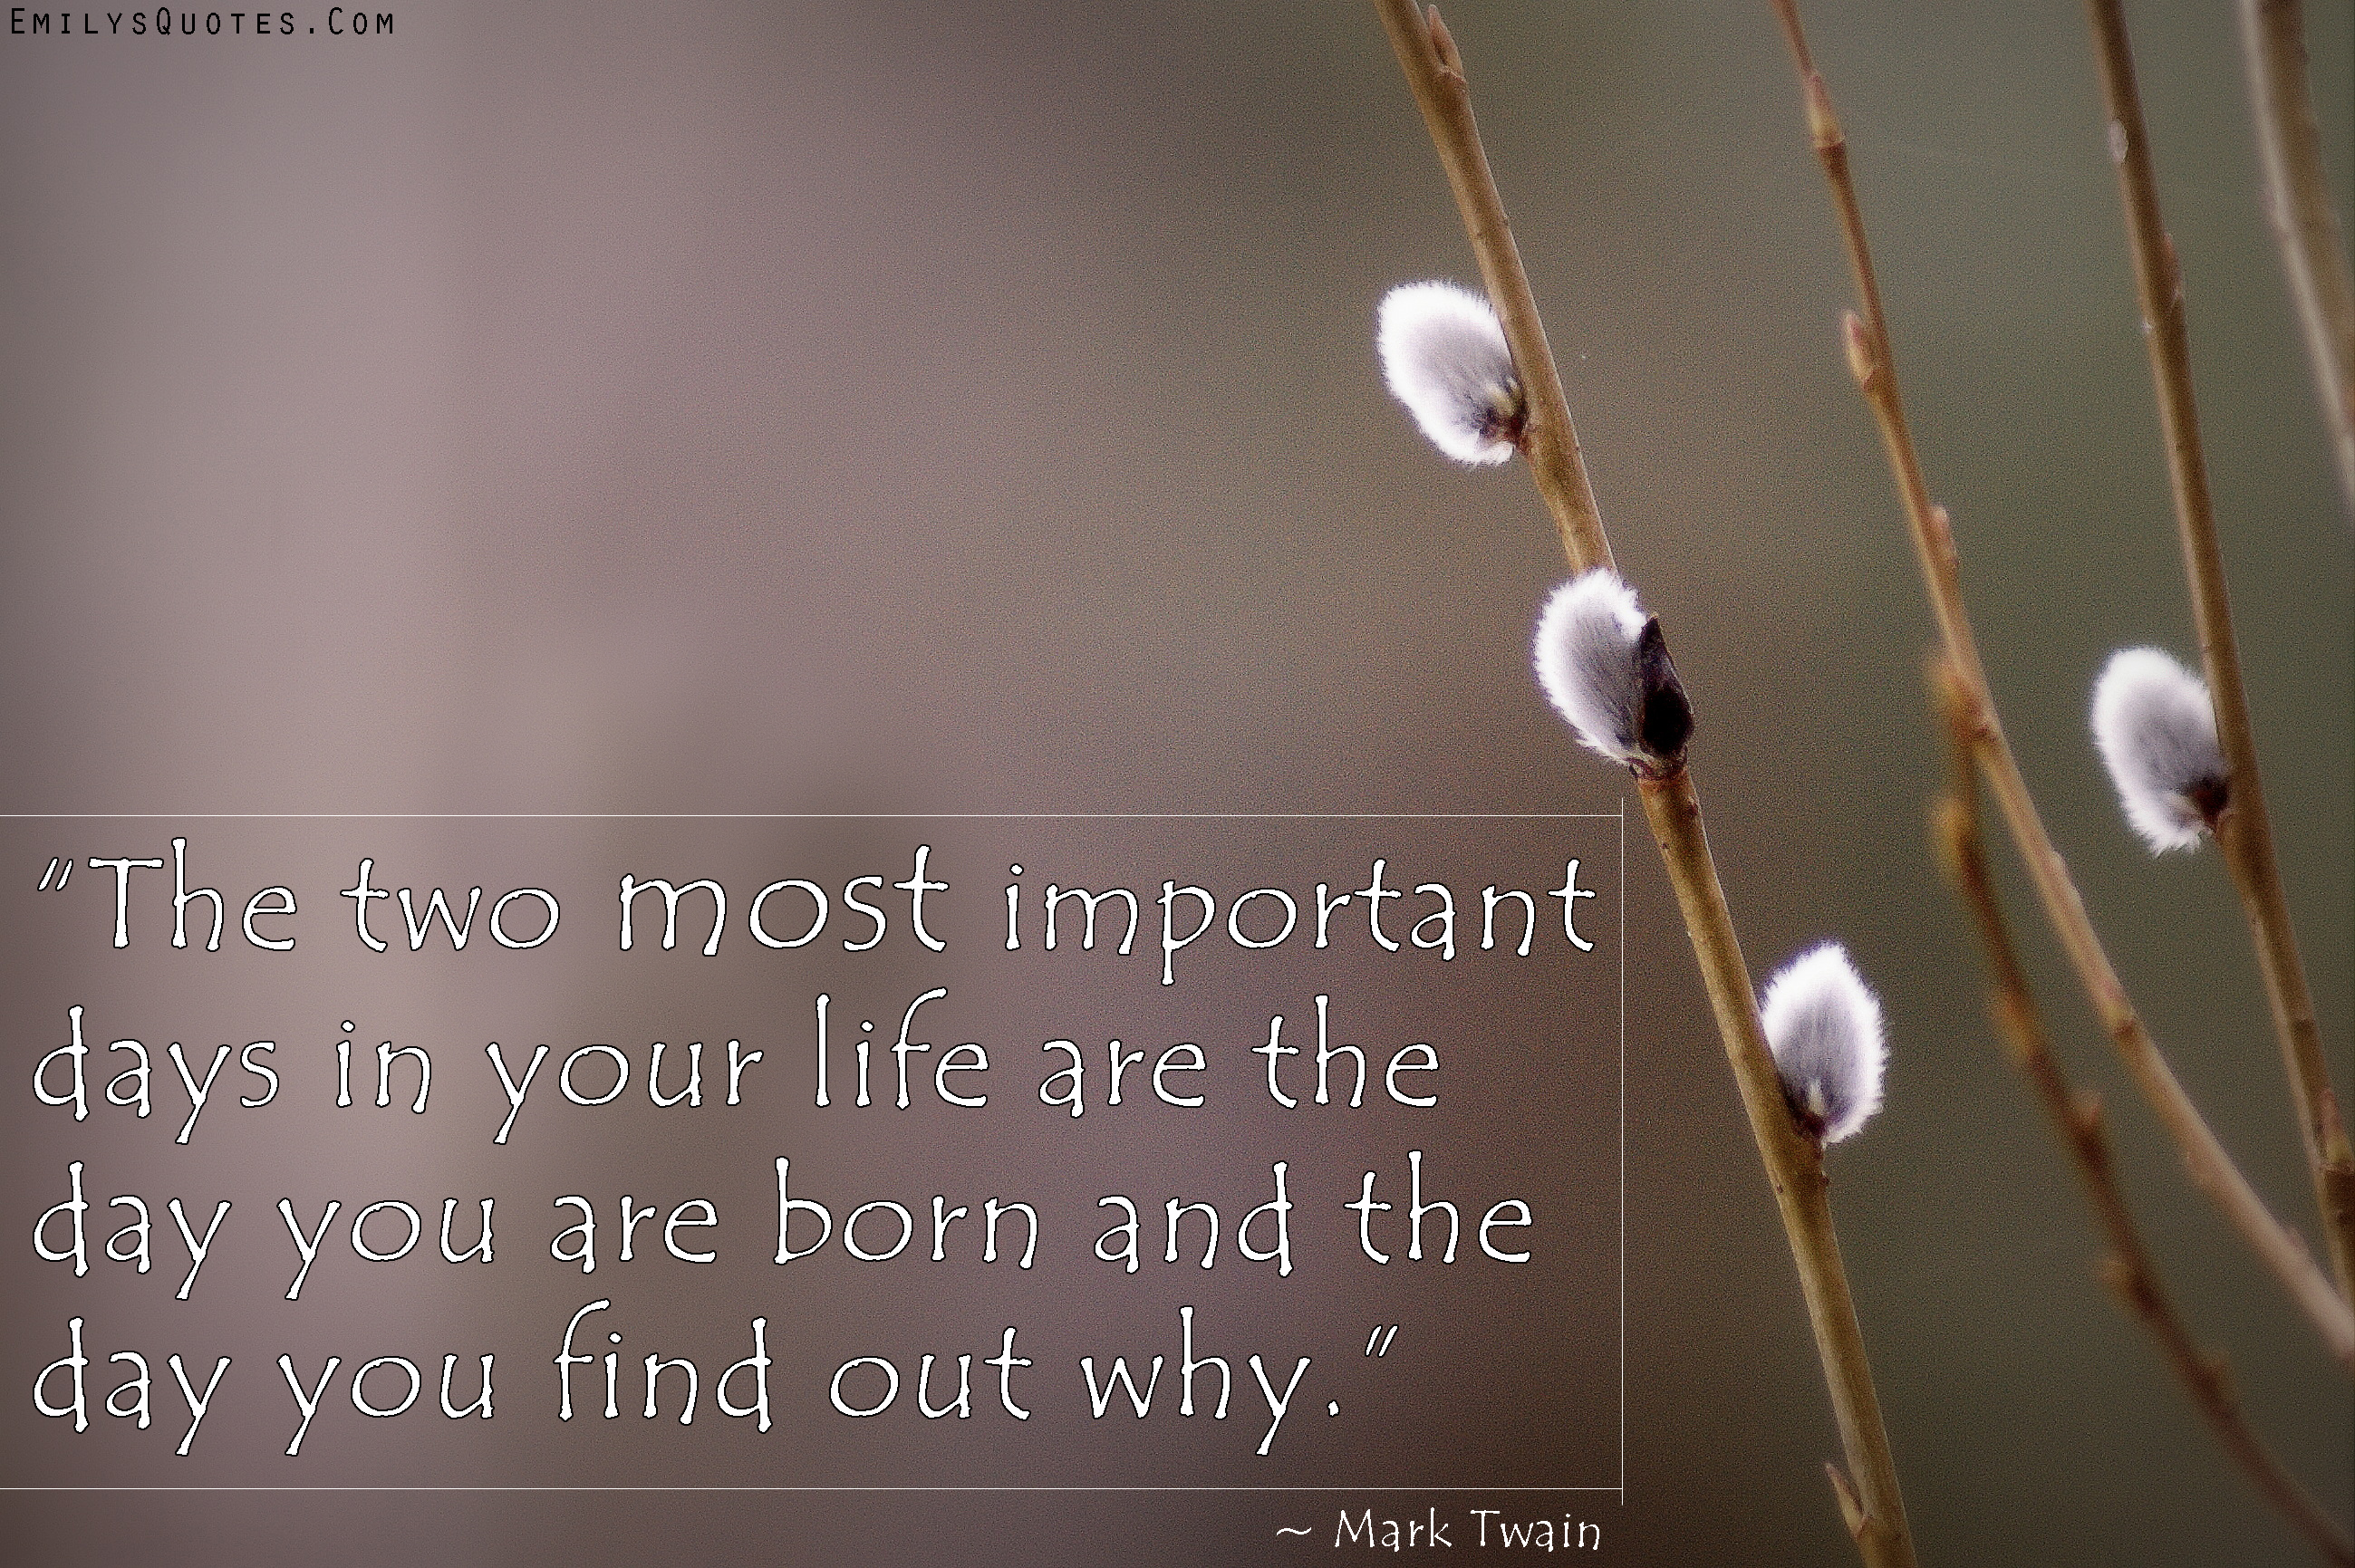 The two most important days in your life are the day you are born and the day you find out why